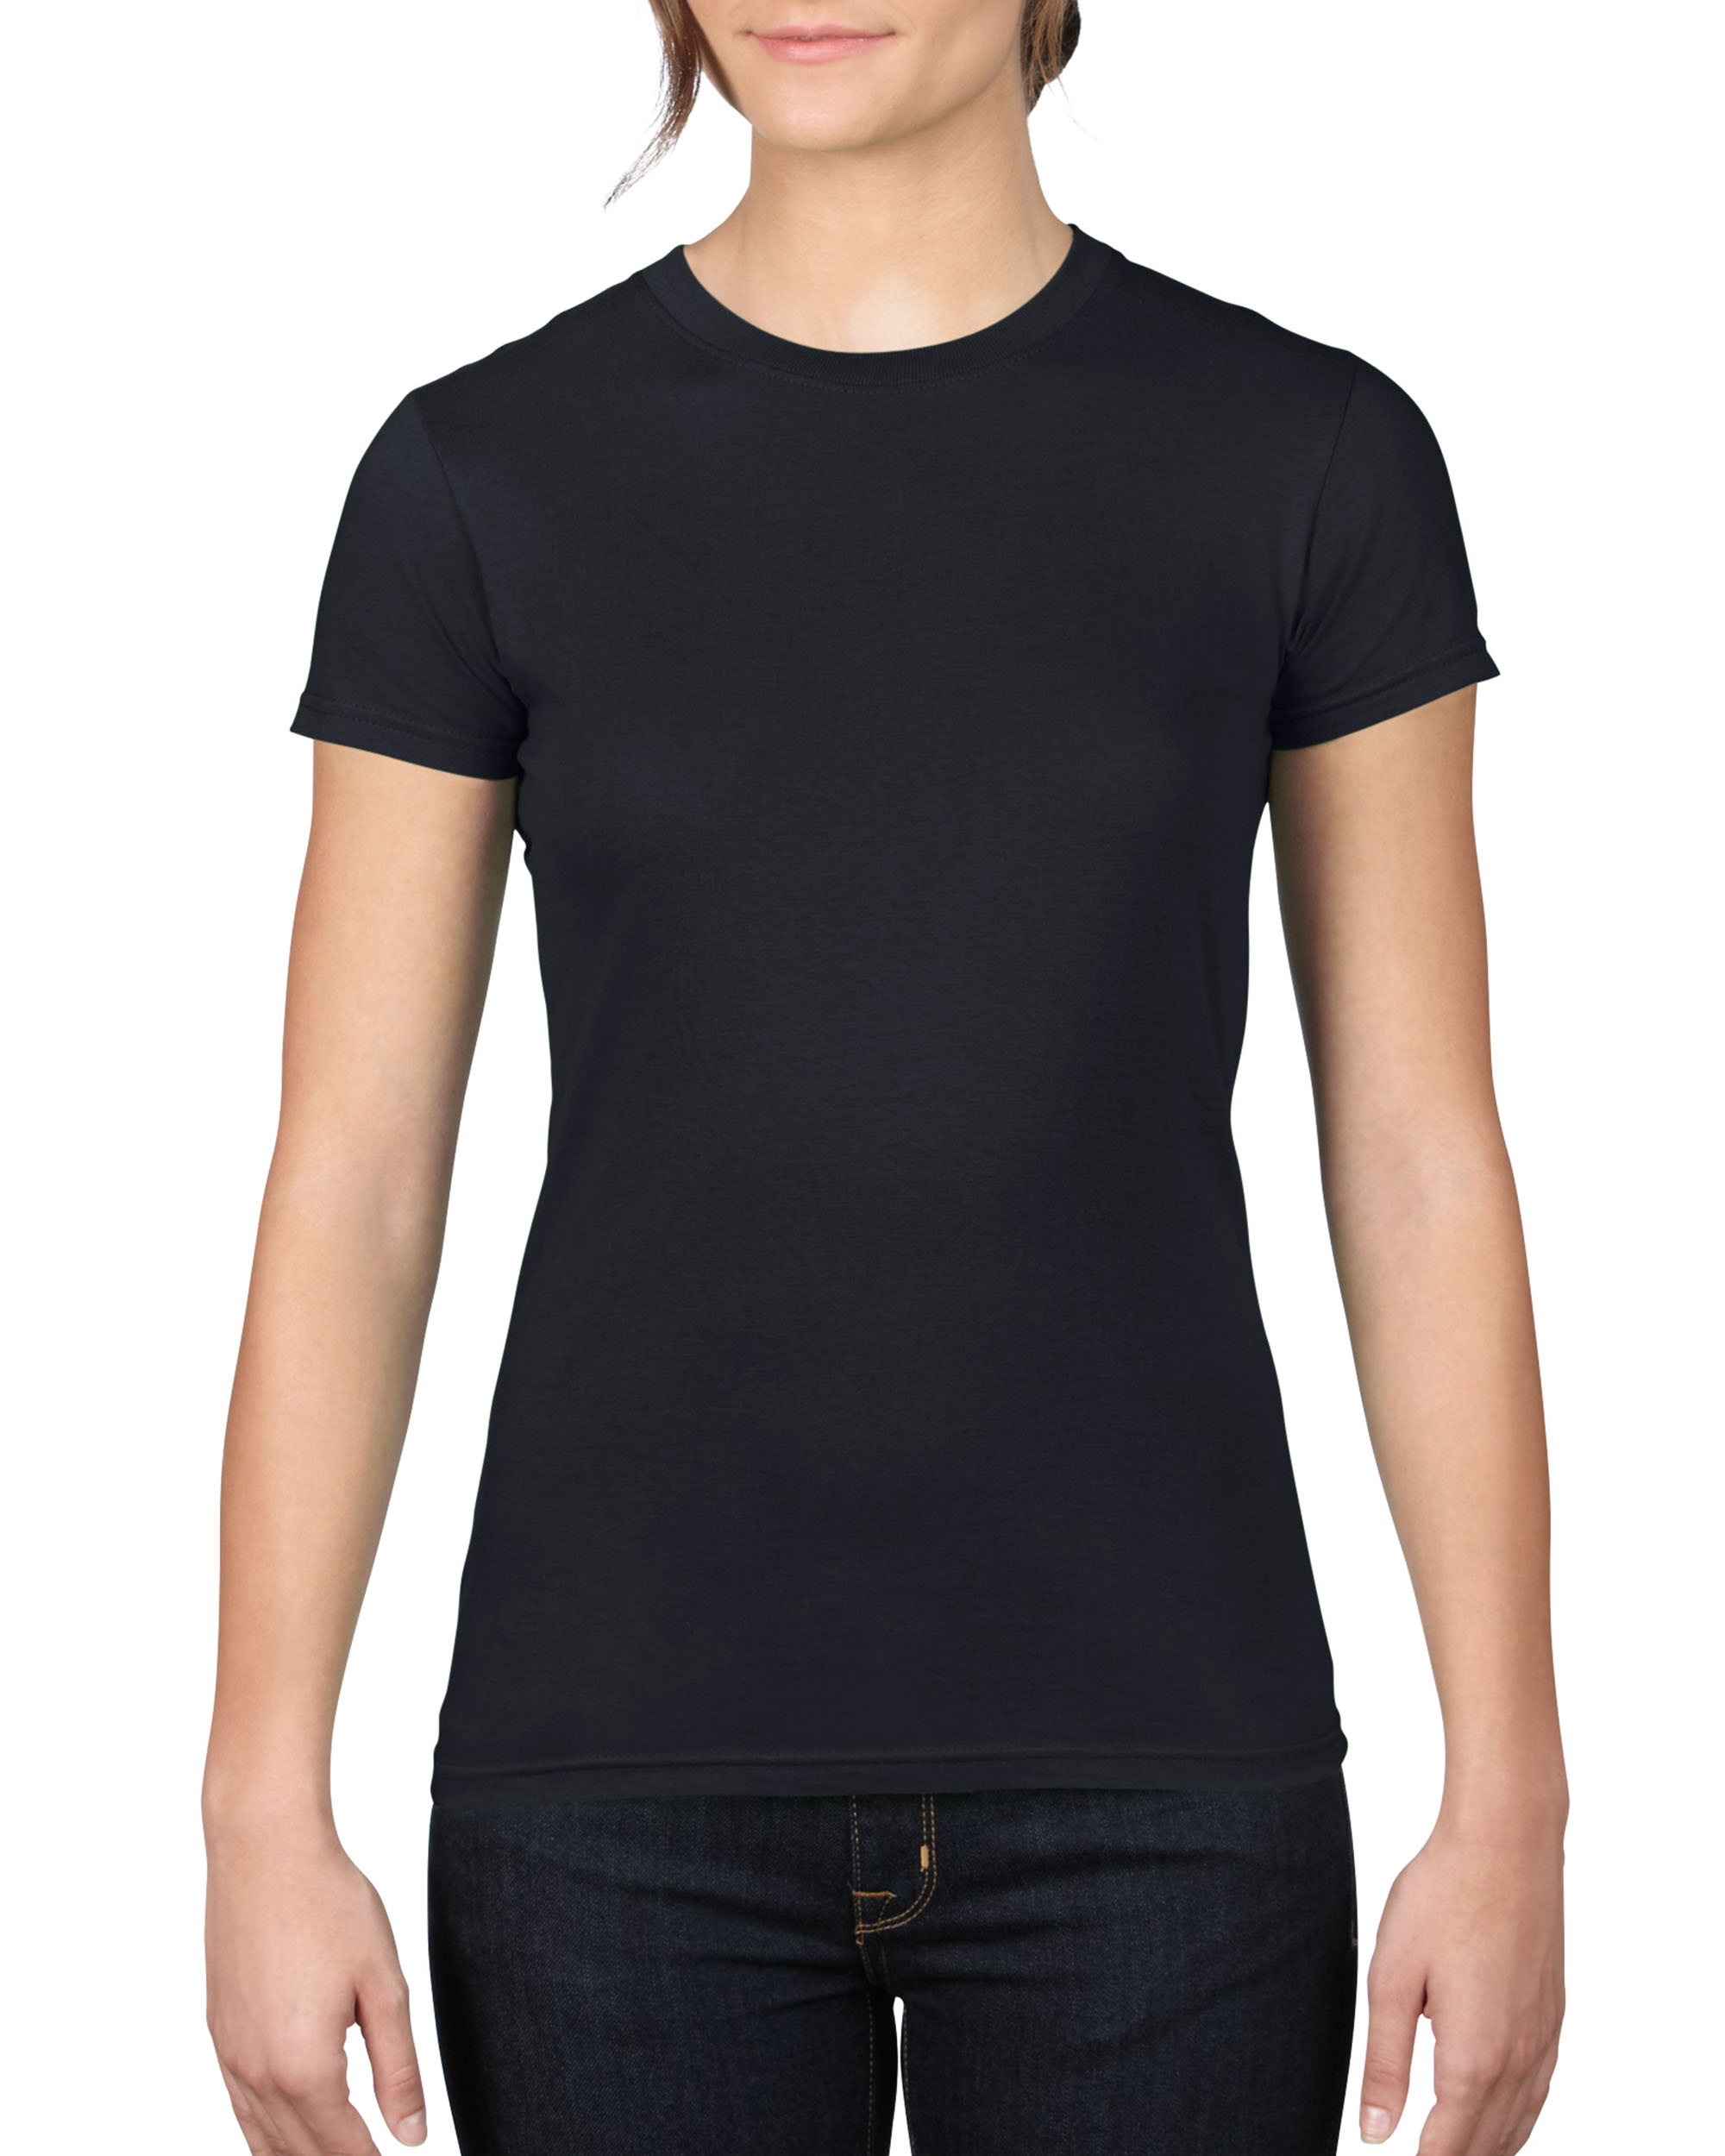 Anvil T-shirt Fitted Lightweight SS for her